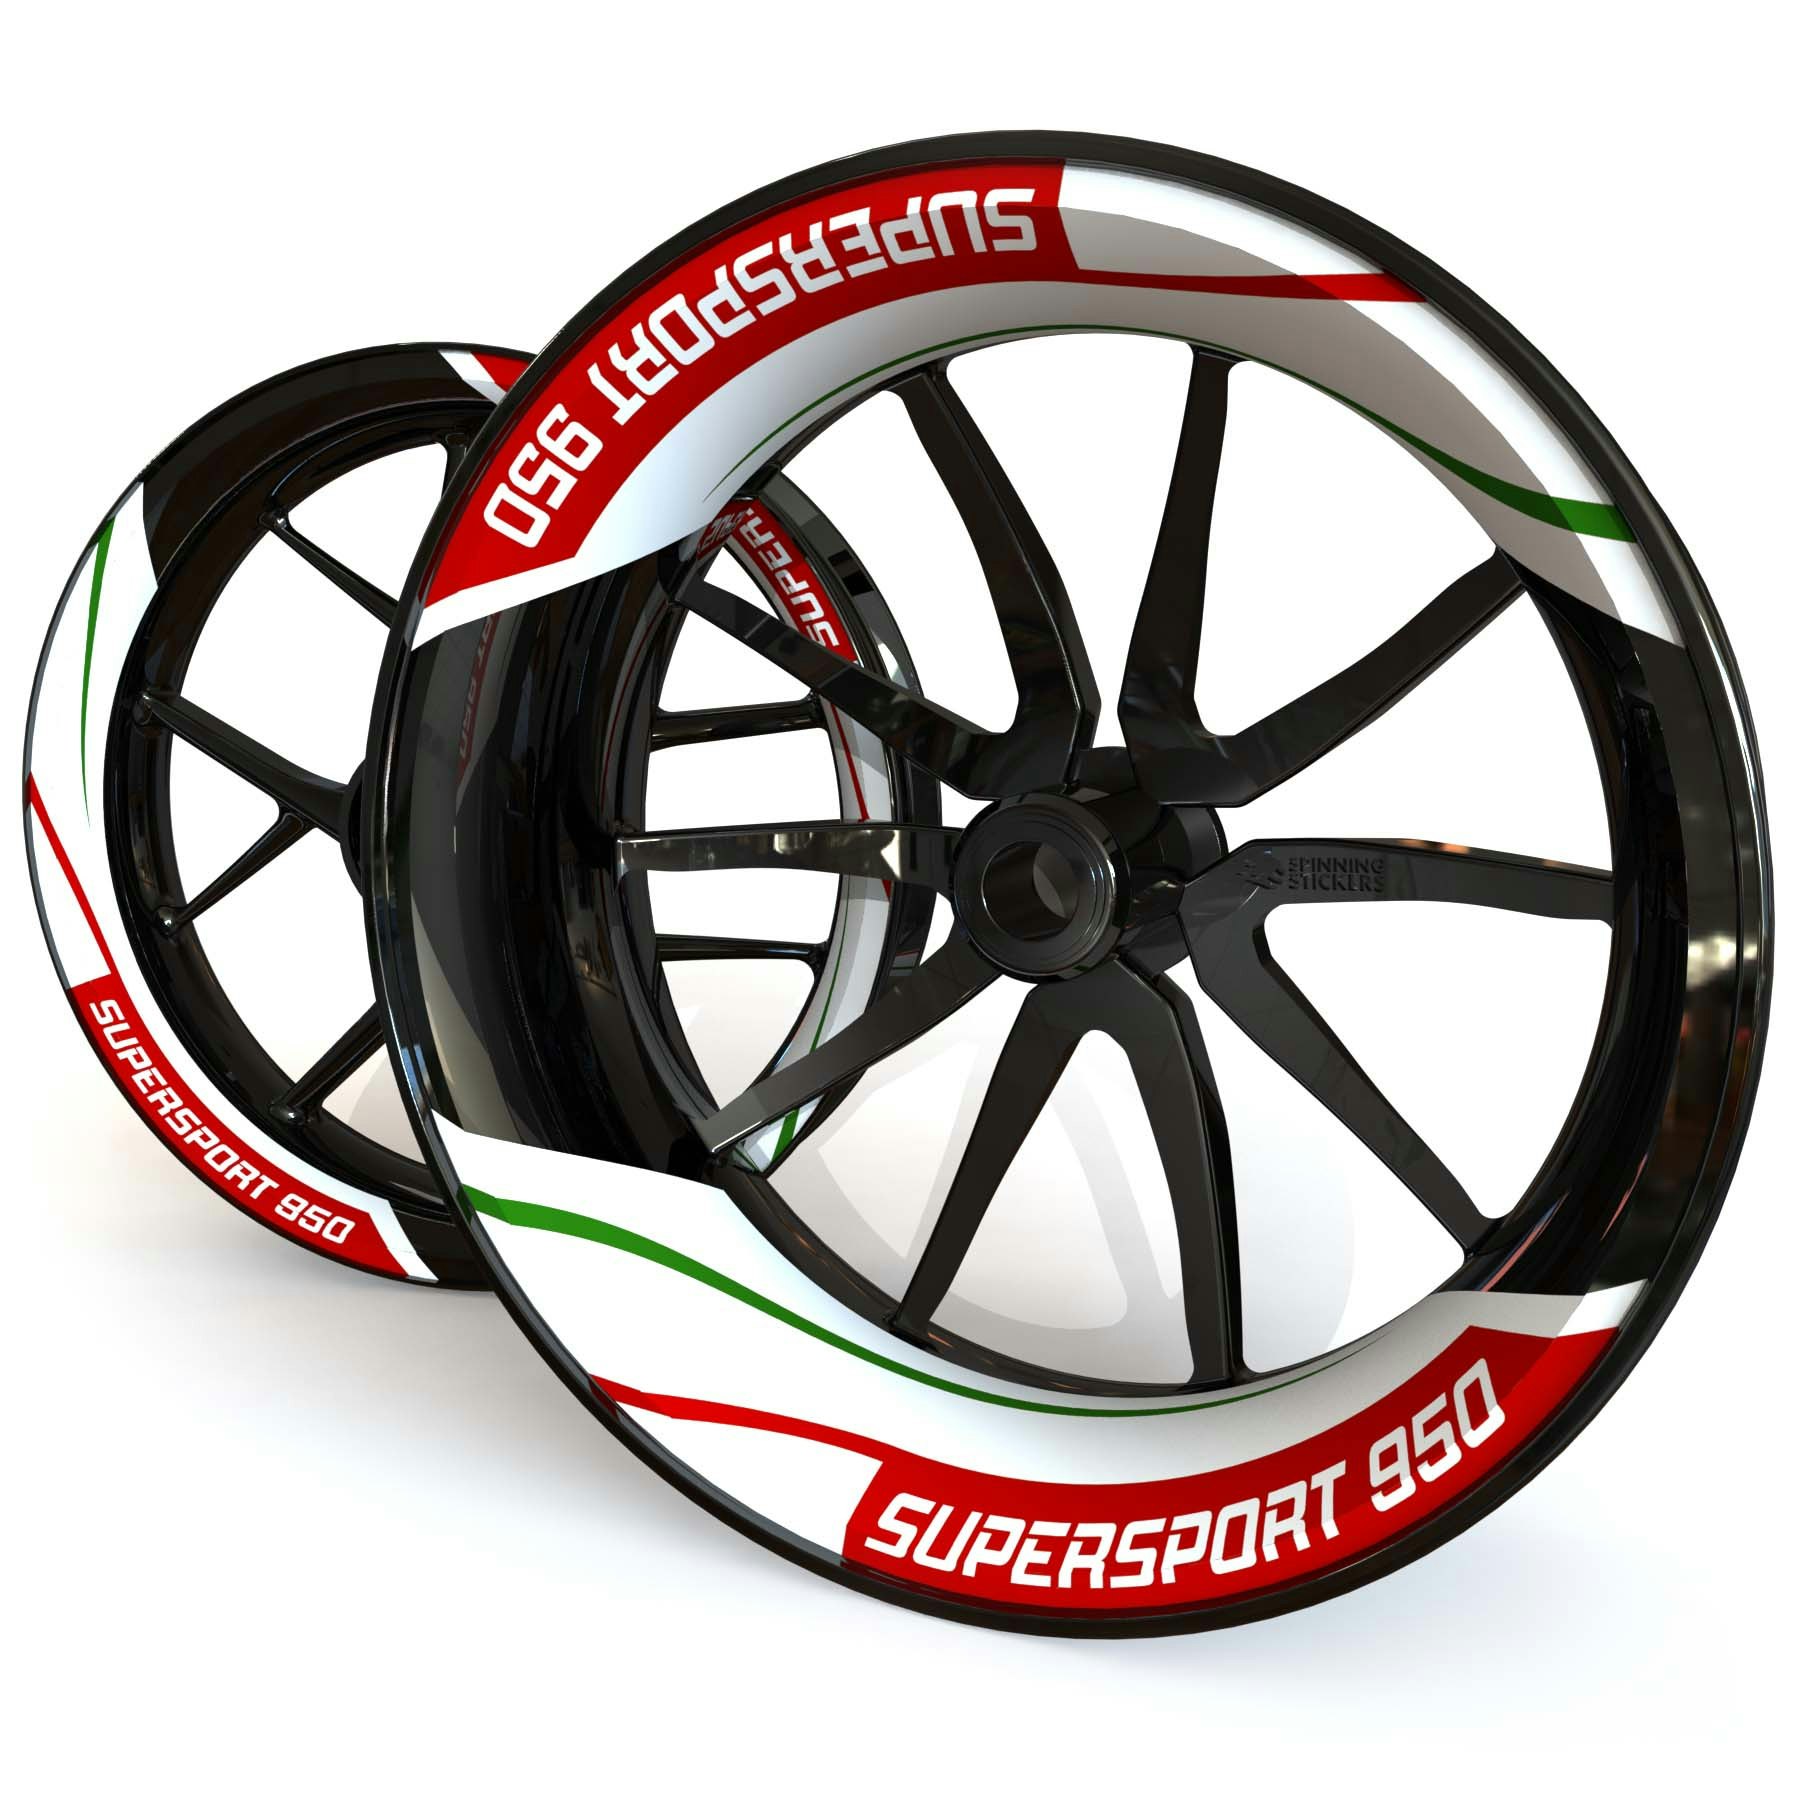 Ducati SuperSport 950 Wheel Stickers kit - Two Piece Design